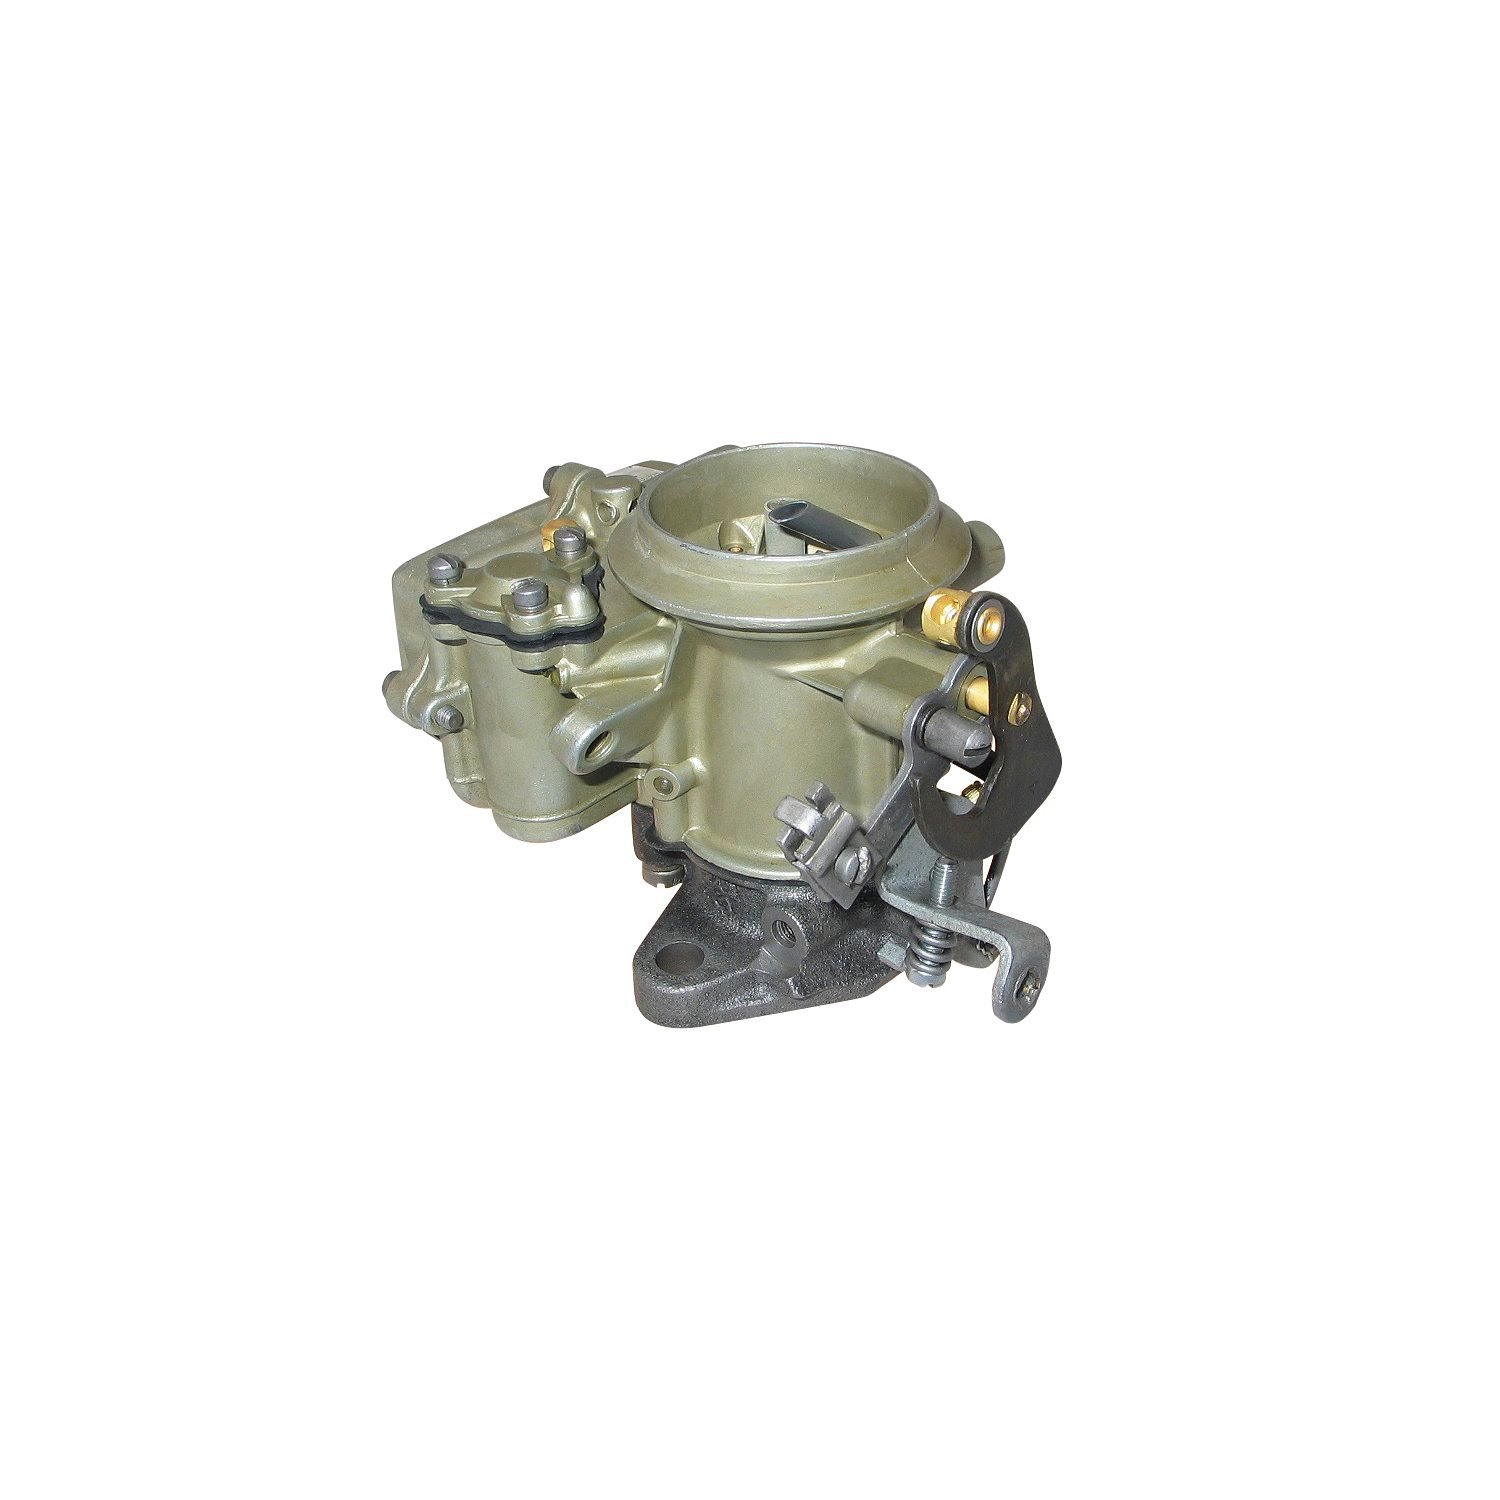 9-908 Holley Remanufactured Carburetor, 1904-Style